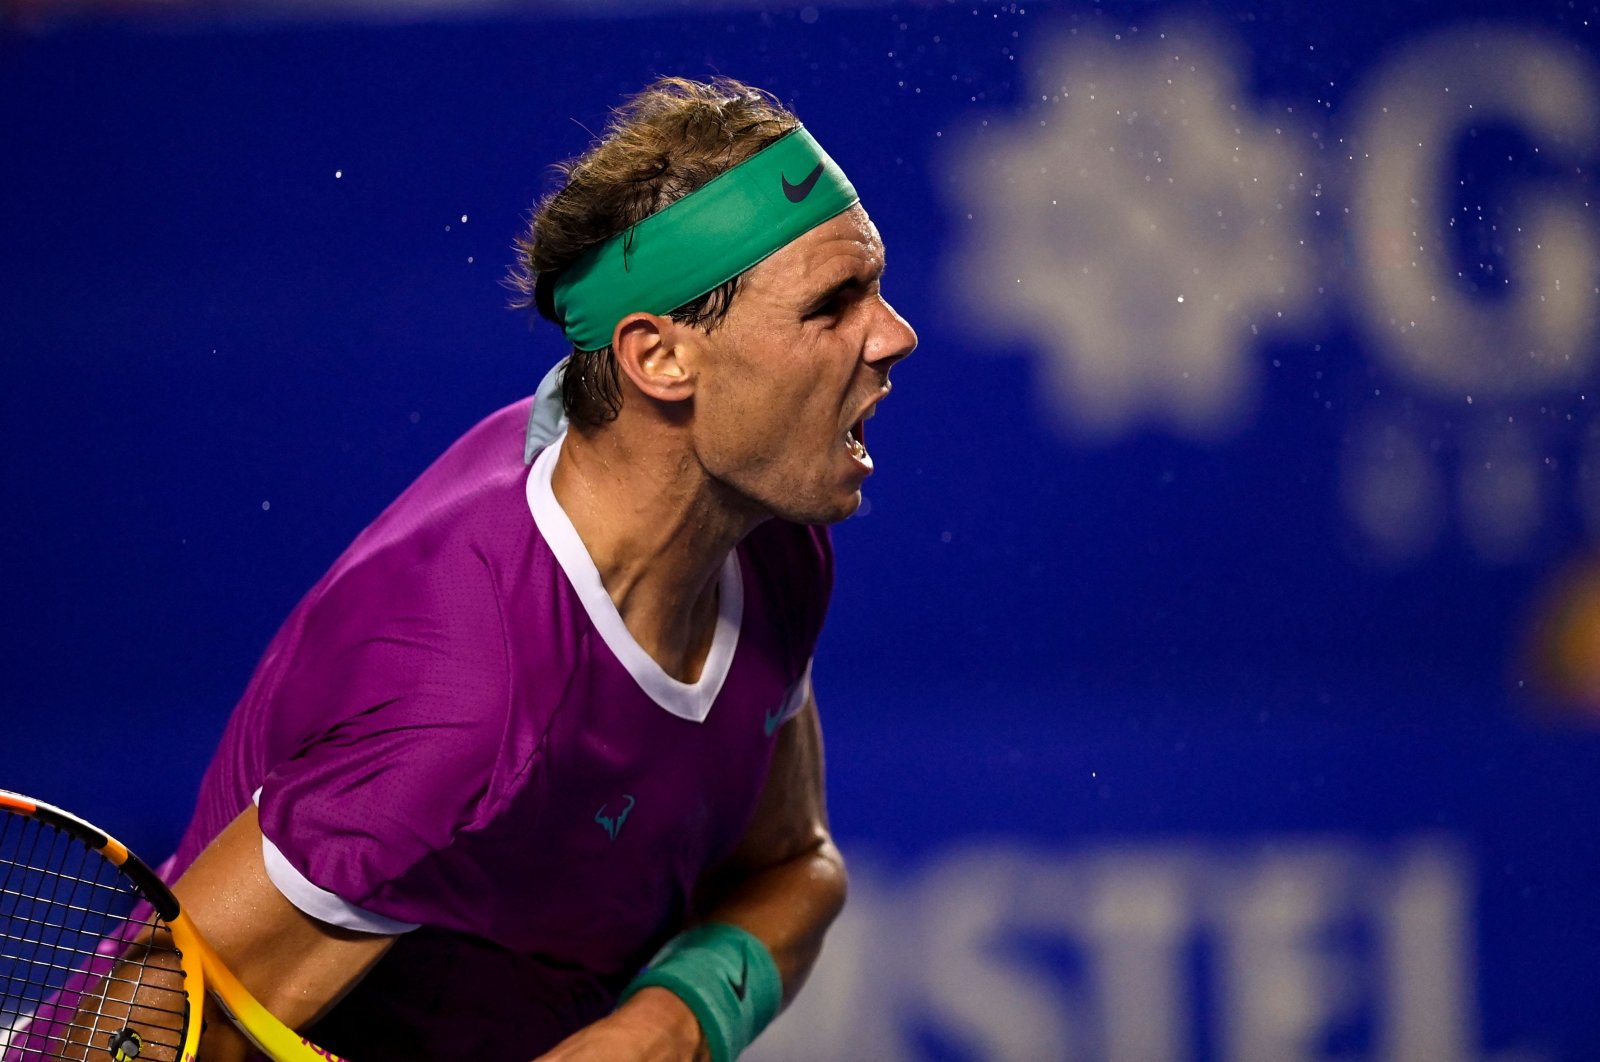 Nadal off to best start to season as Medvedev has sights on No. 1